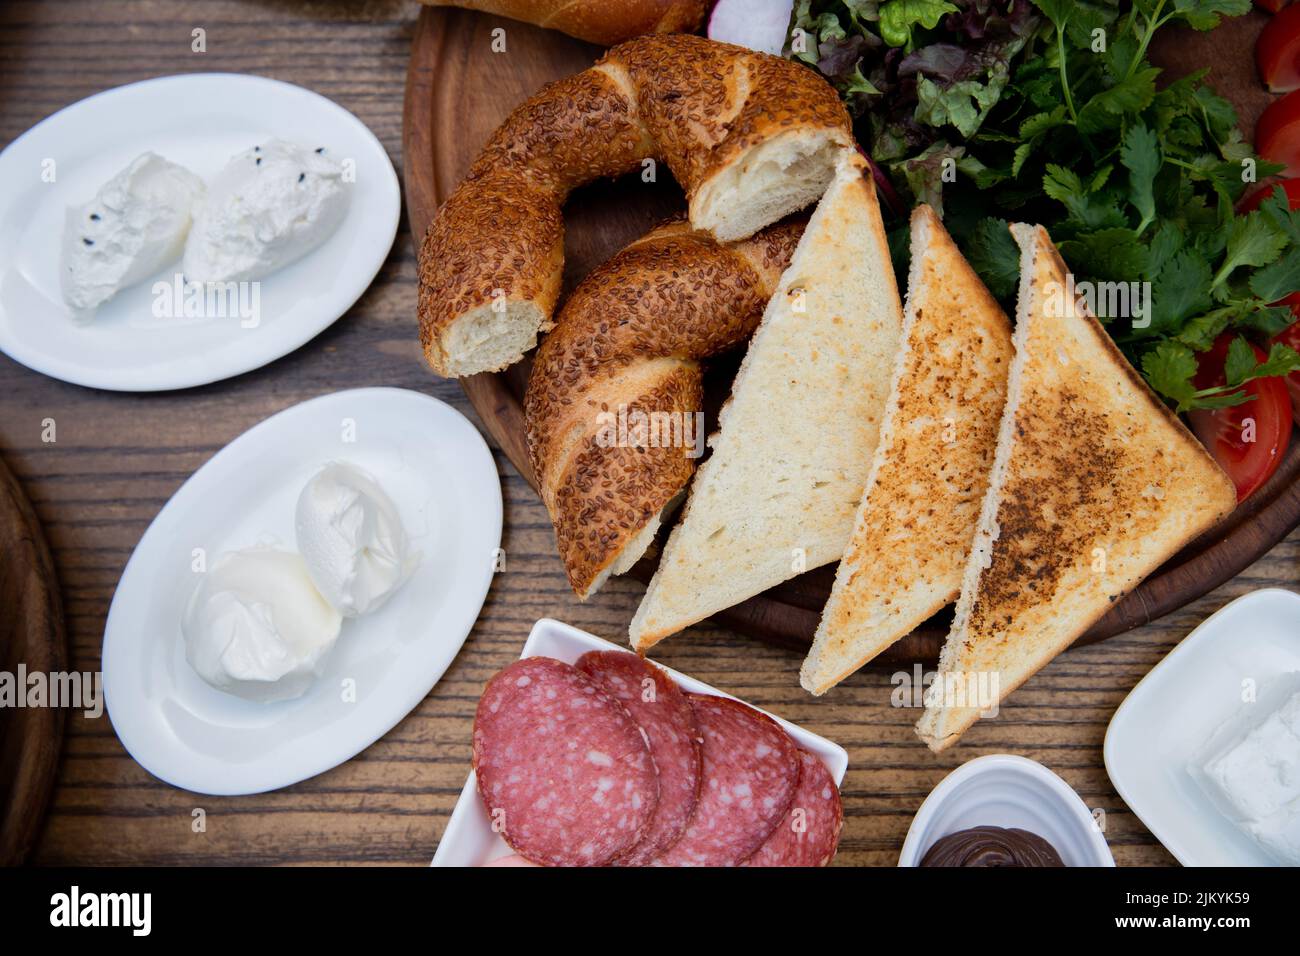 A top view of a lunch table with toasted bread, cured meat, mascarpone cheese, and vegetables Stock Photo